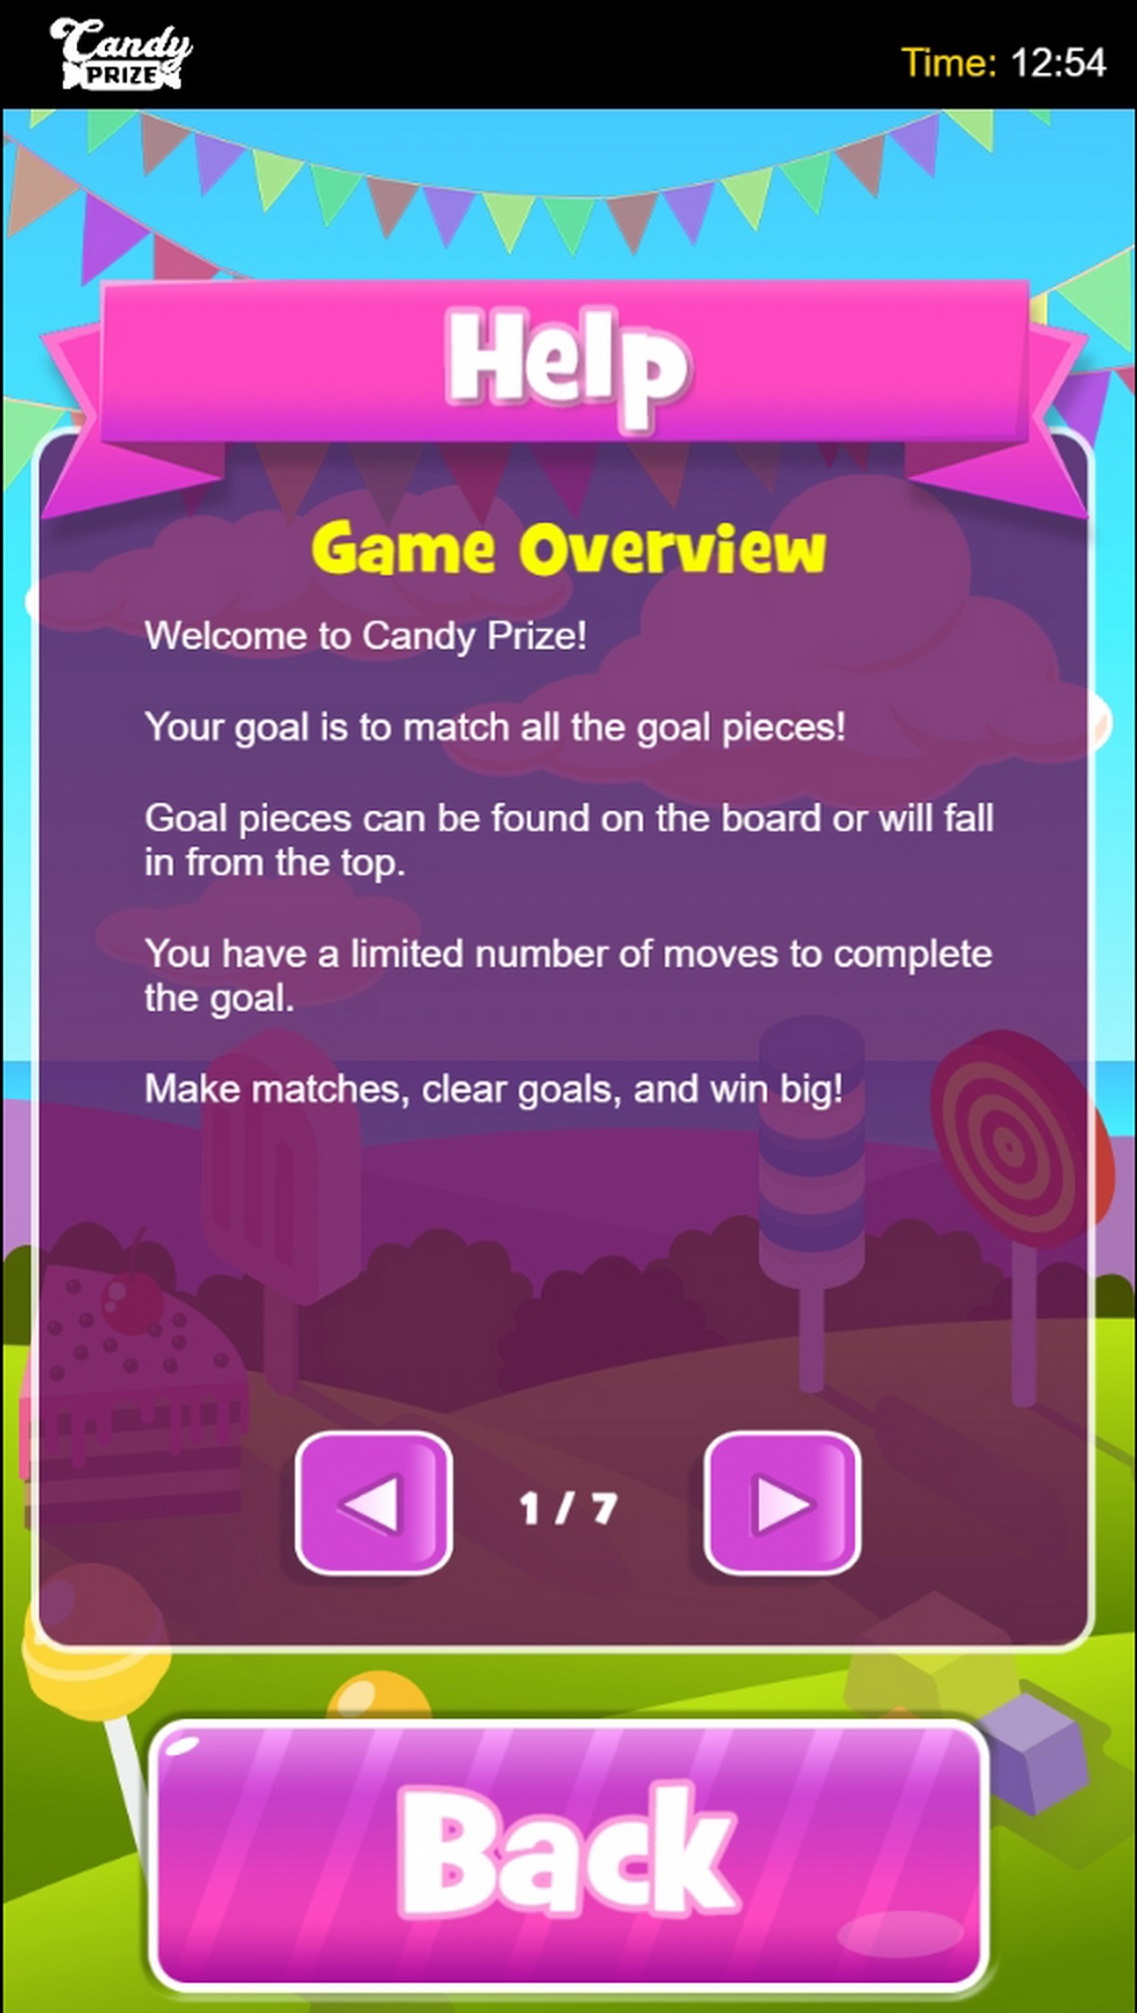 Info of Candy Prize BIG Slot Game by Green Jade Games